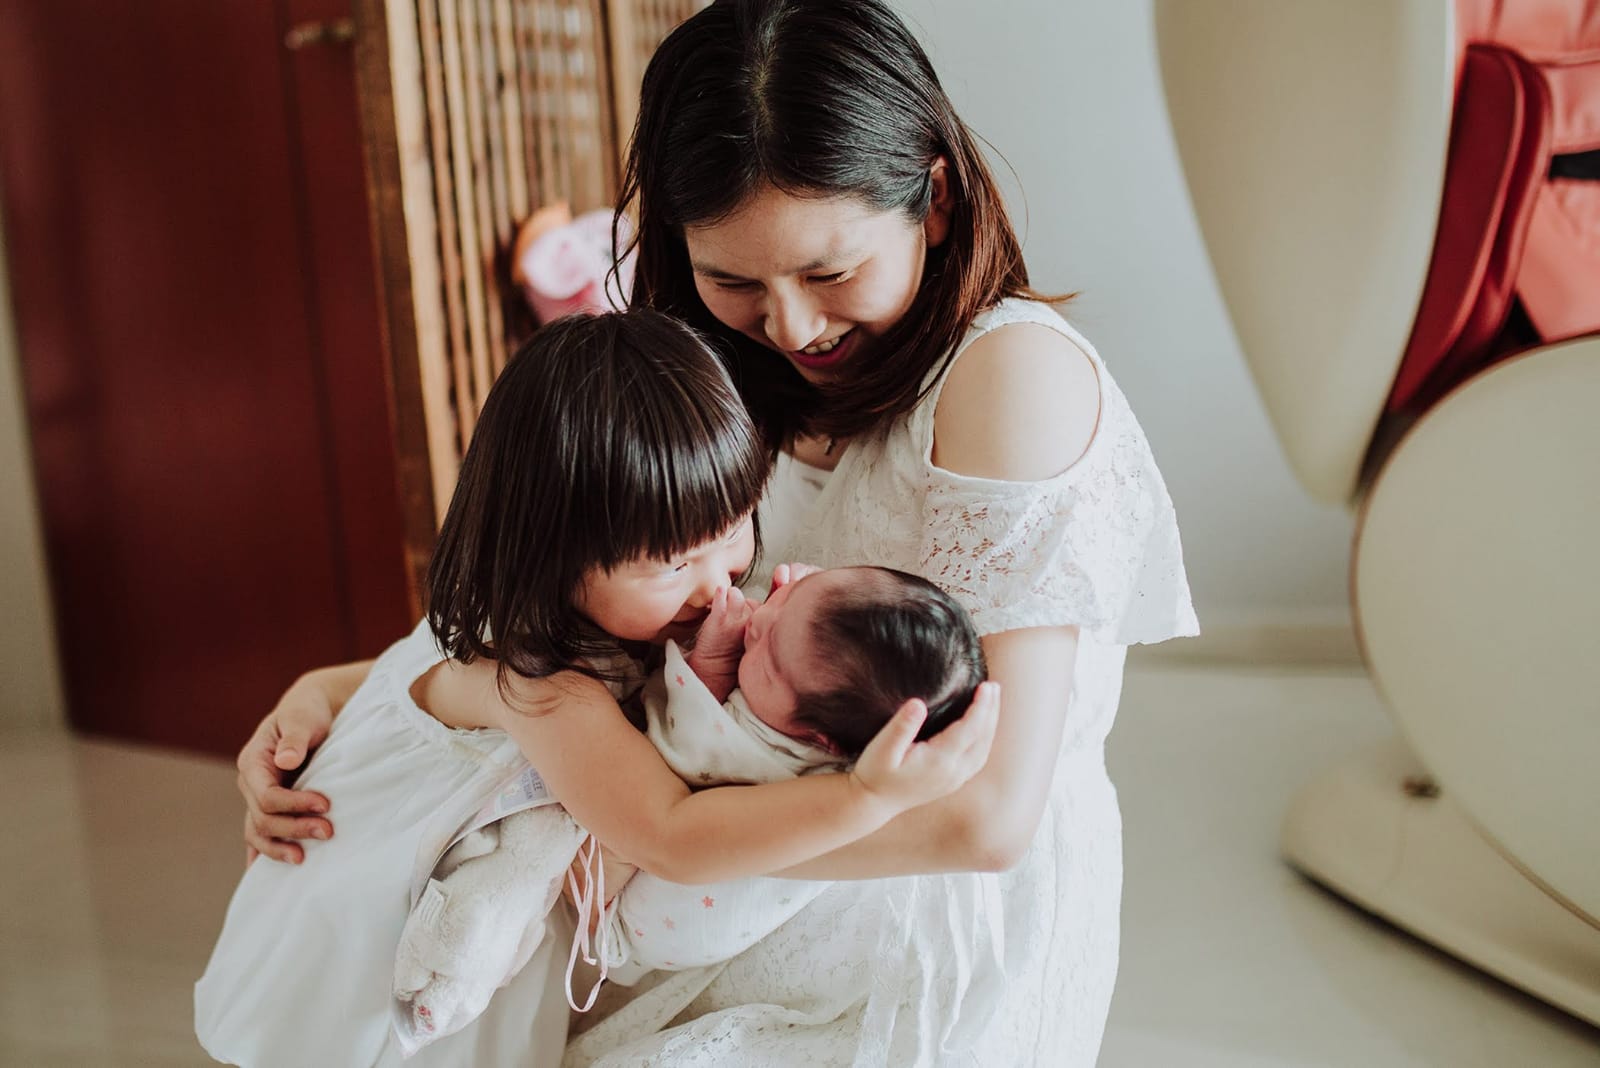 Siew is still managing her postnatal depression but maintains that the support of her community of Christian mums is instrumental in her recovery. Photo courtesy of Christina Siew.